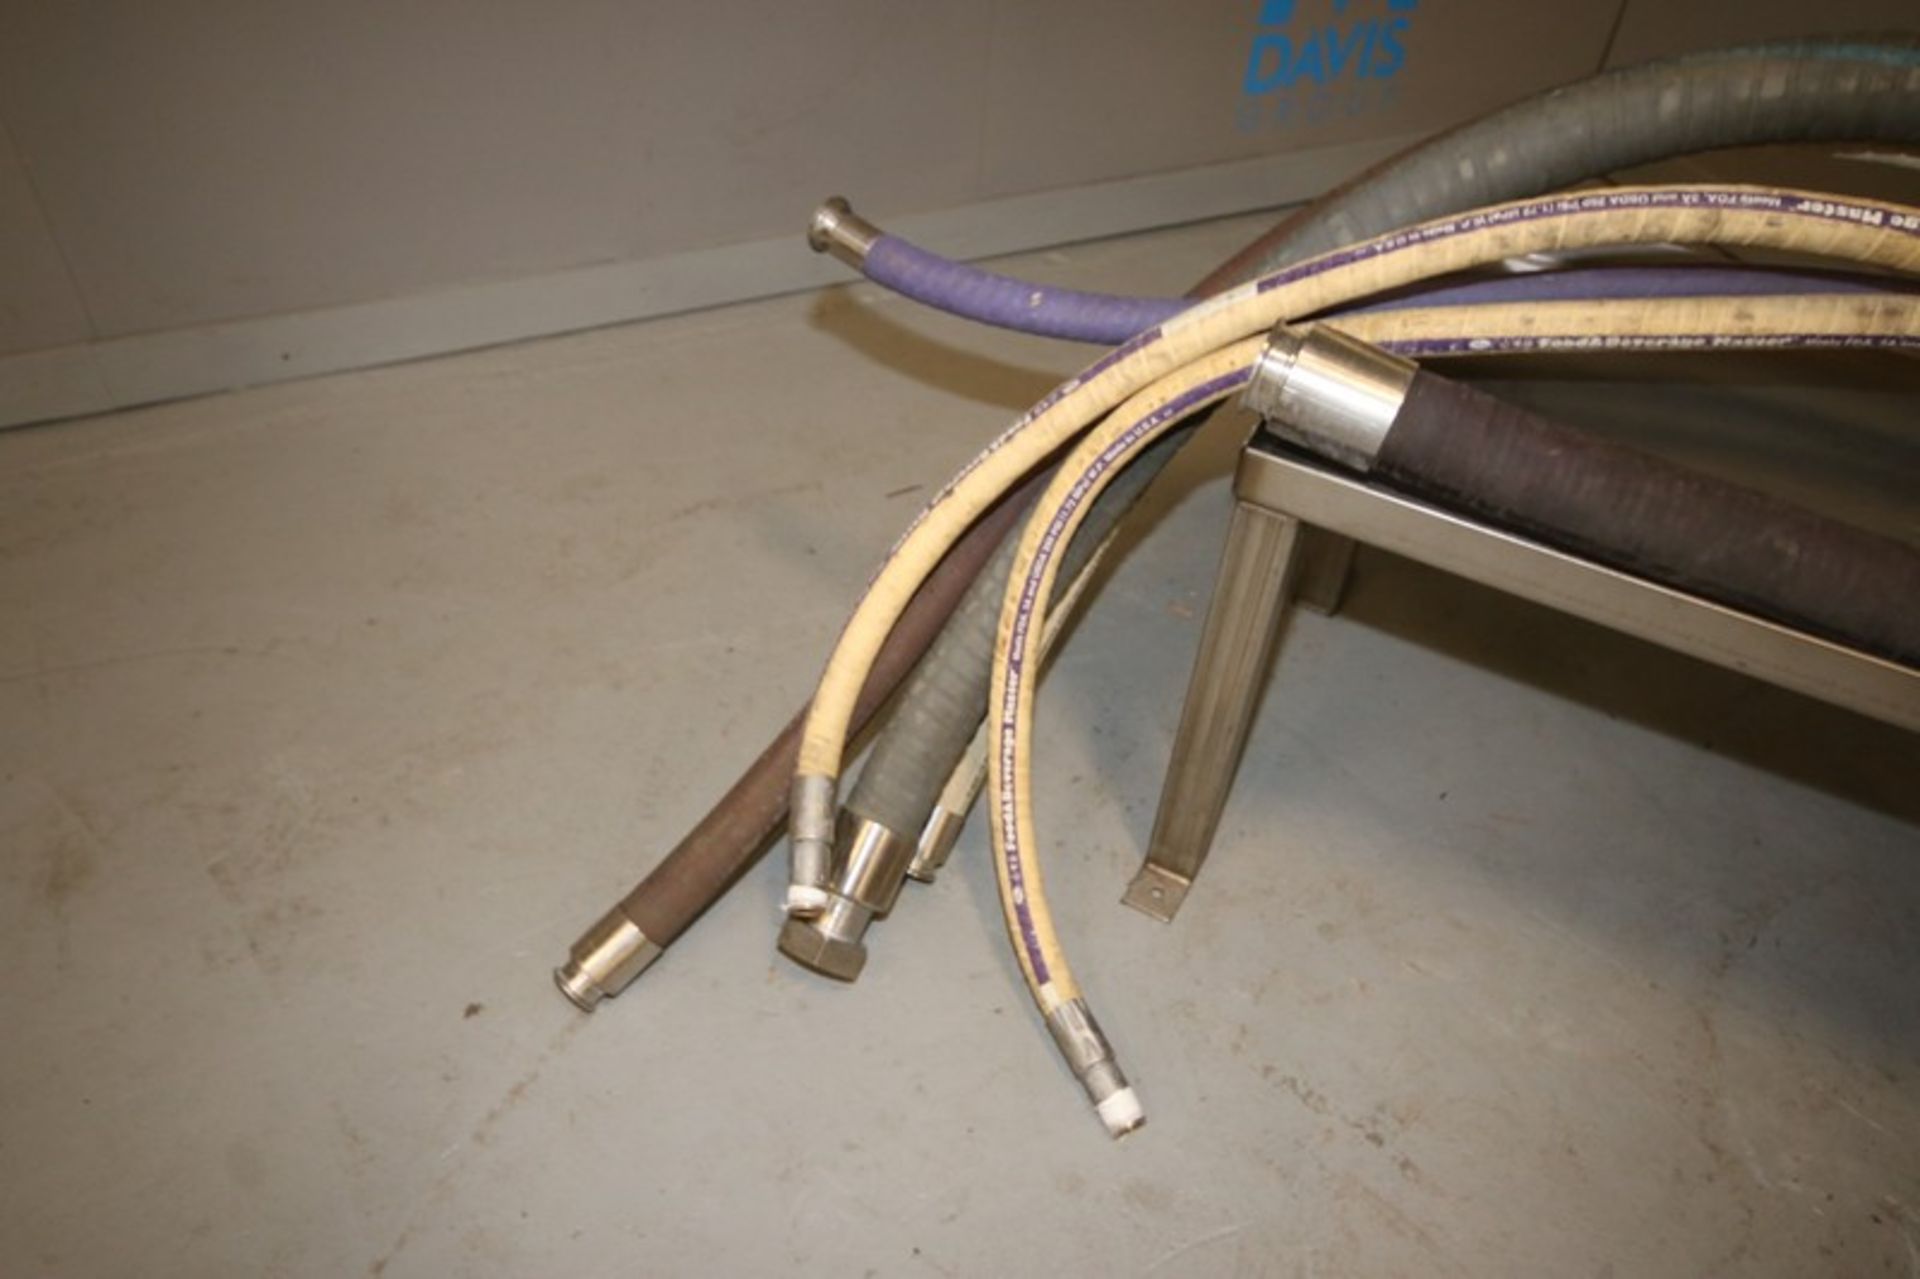 Assorted Transfer Hoses, Length Ranging FromAprox. 35" L - 125" L, Clamp Type, Insert Type, and - Image 5 of 7